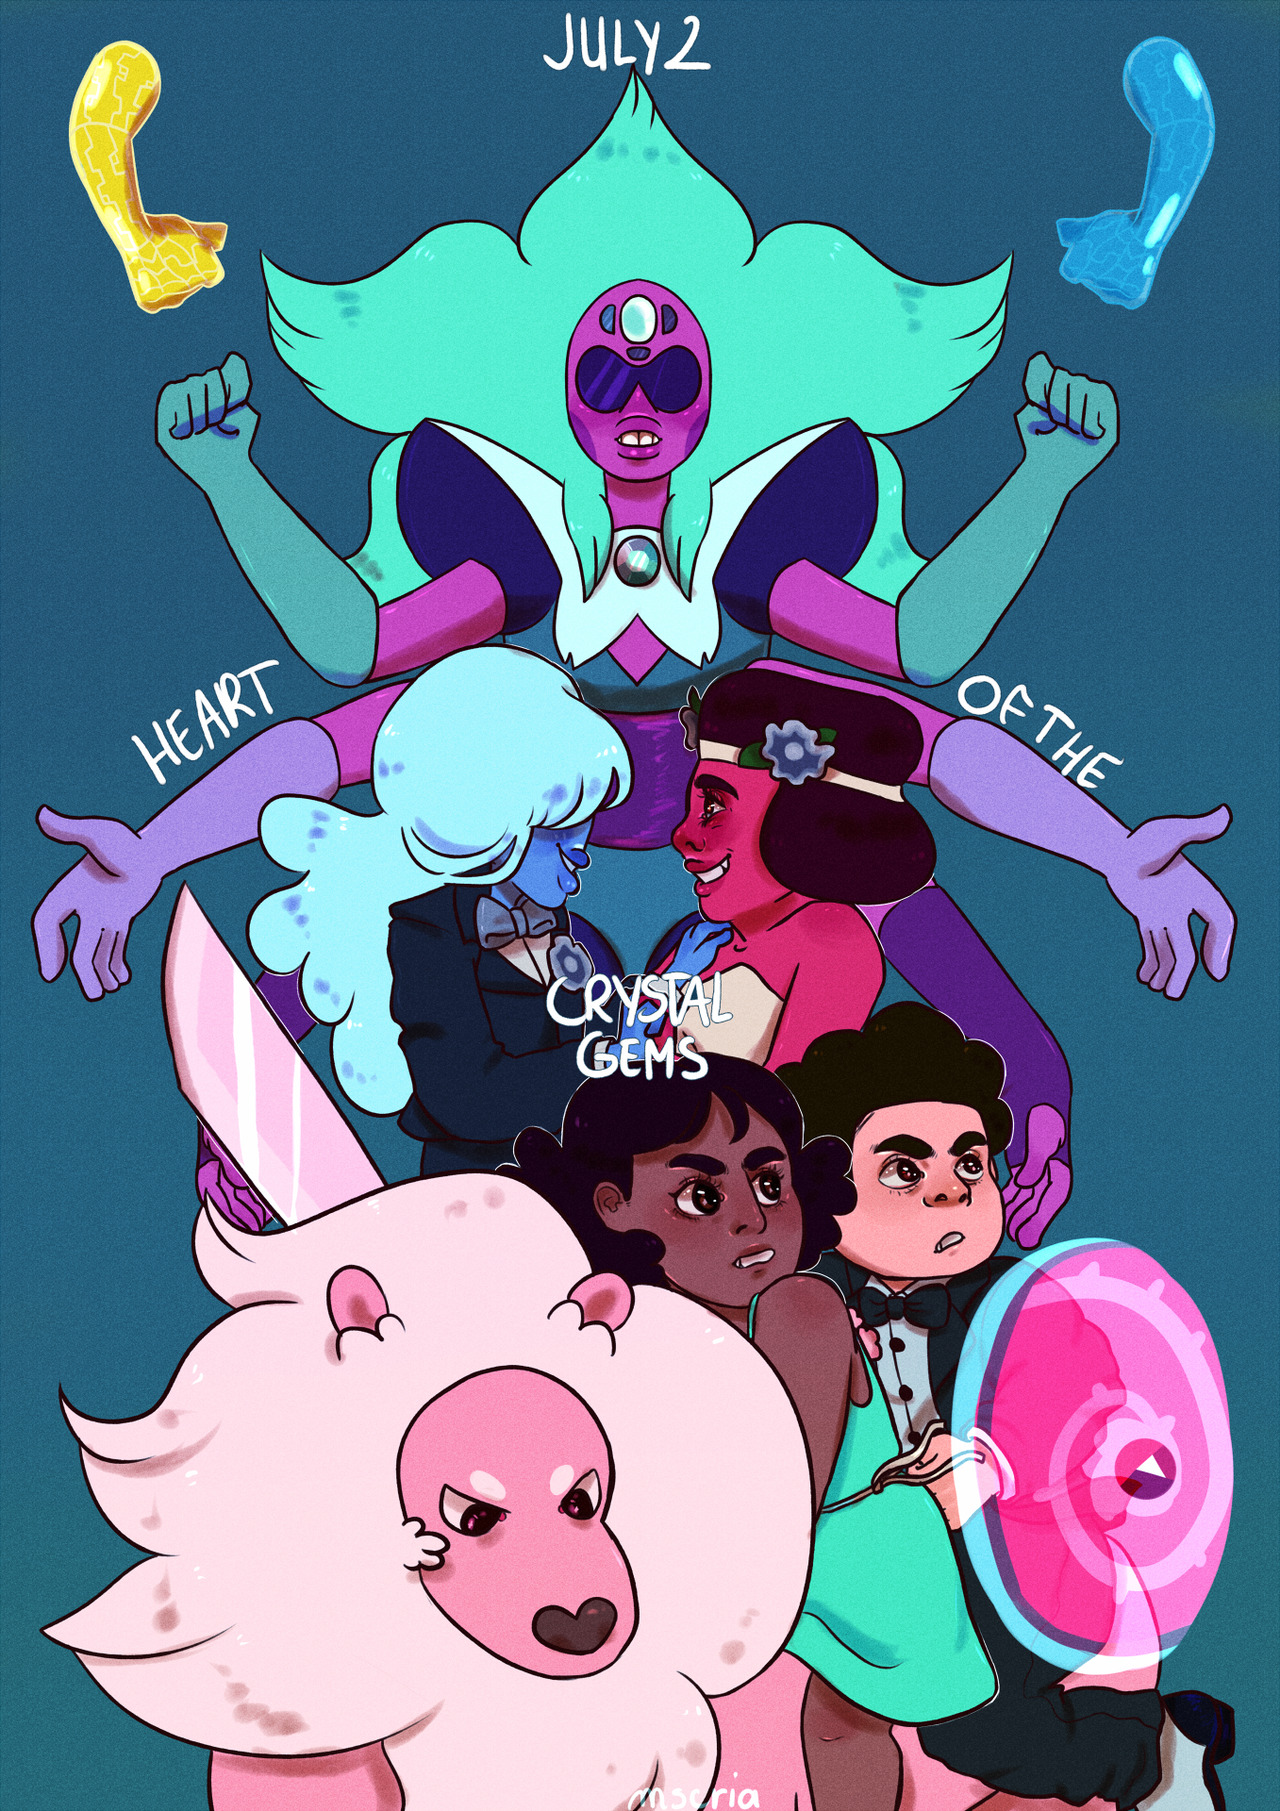 whos pumMPED for heart of the crystal gems arc ? beCAUSE I SURE AM